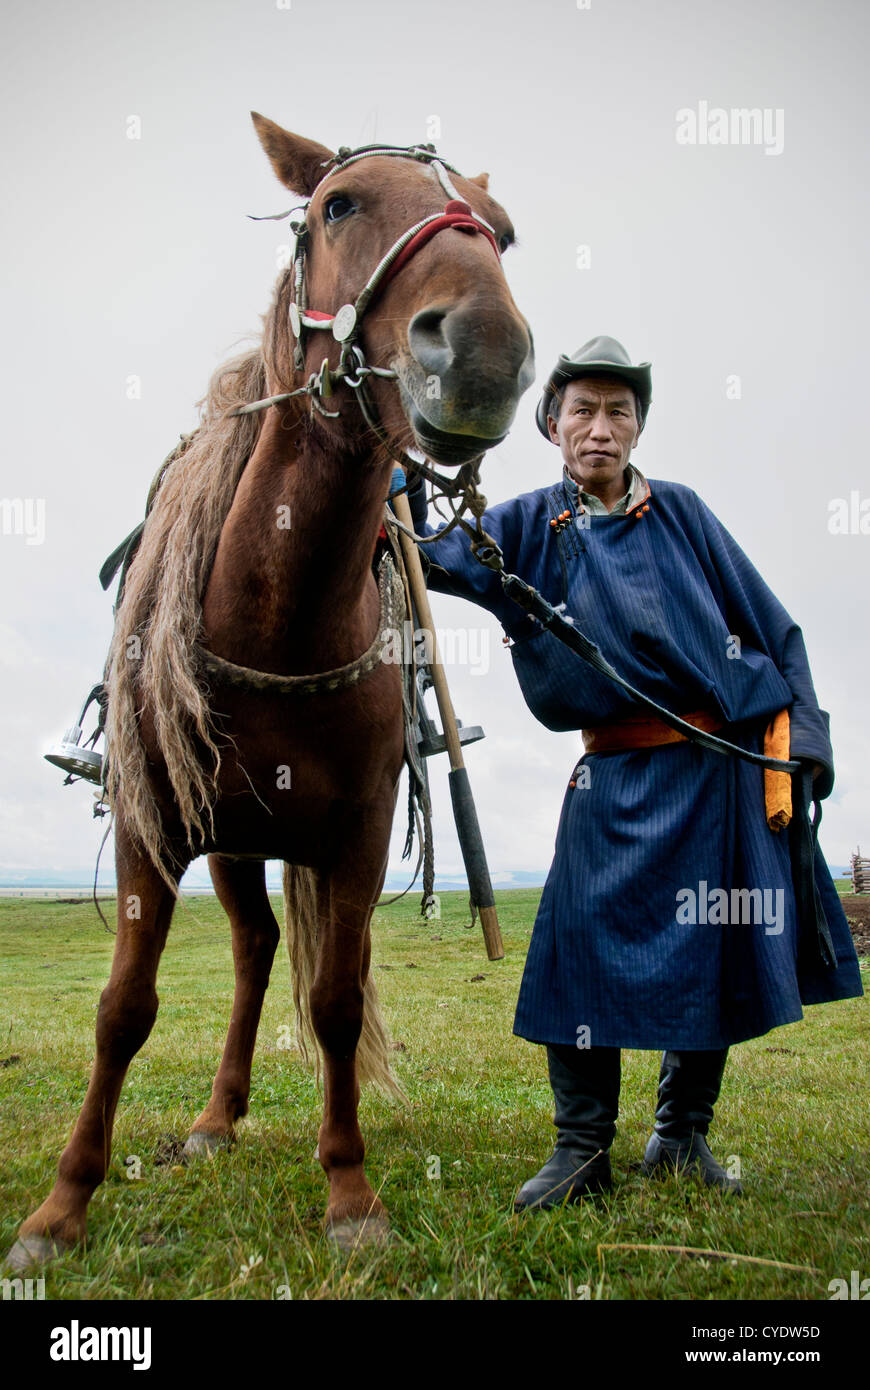 portrait-of-a-nomad-with-his-horse-khovs